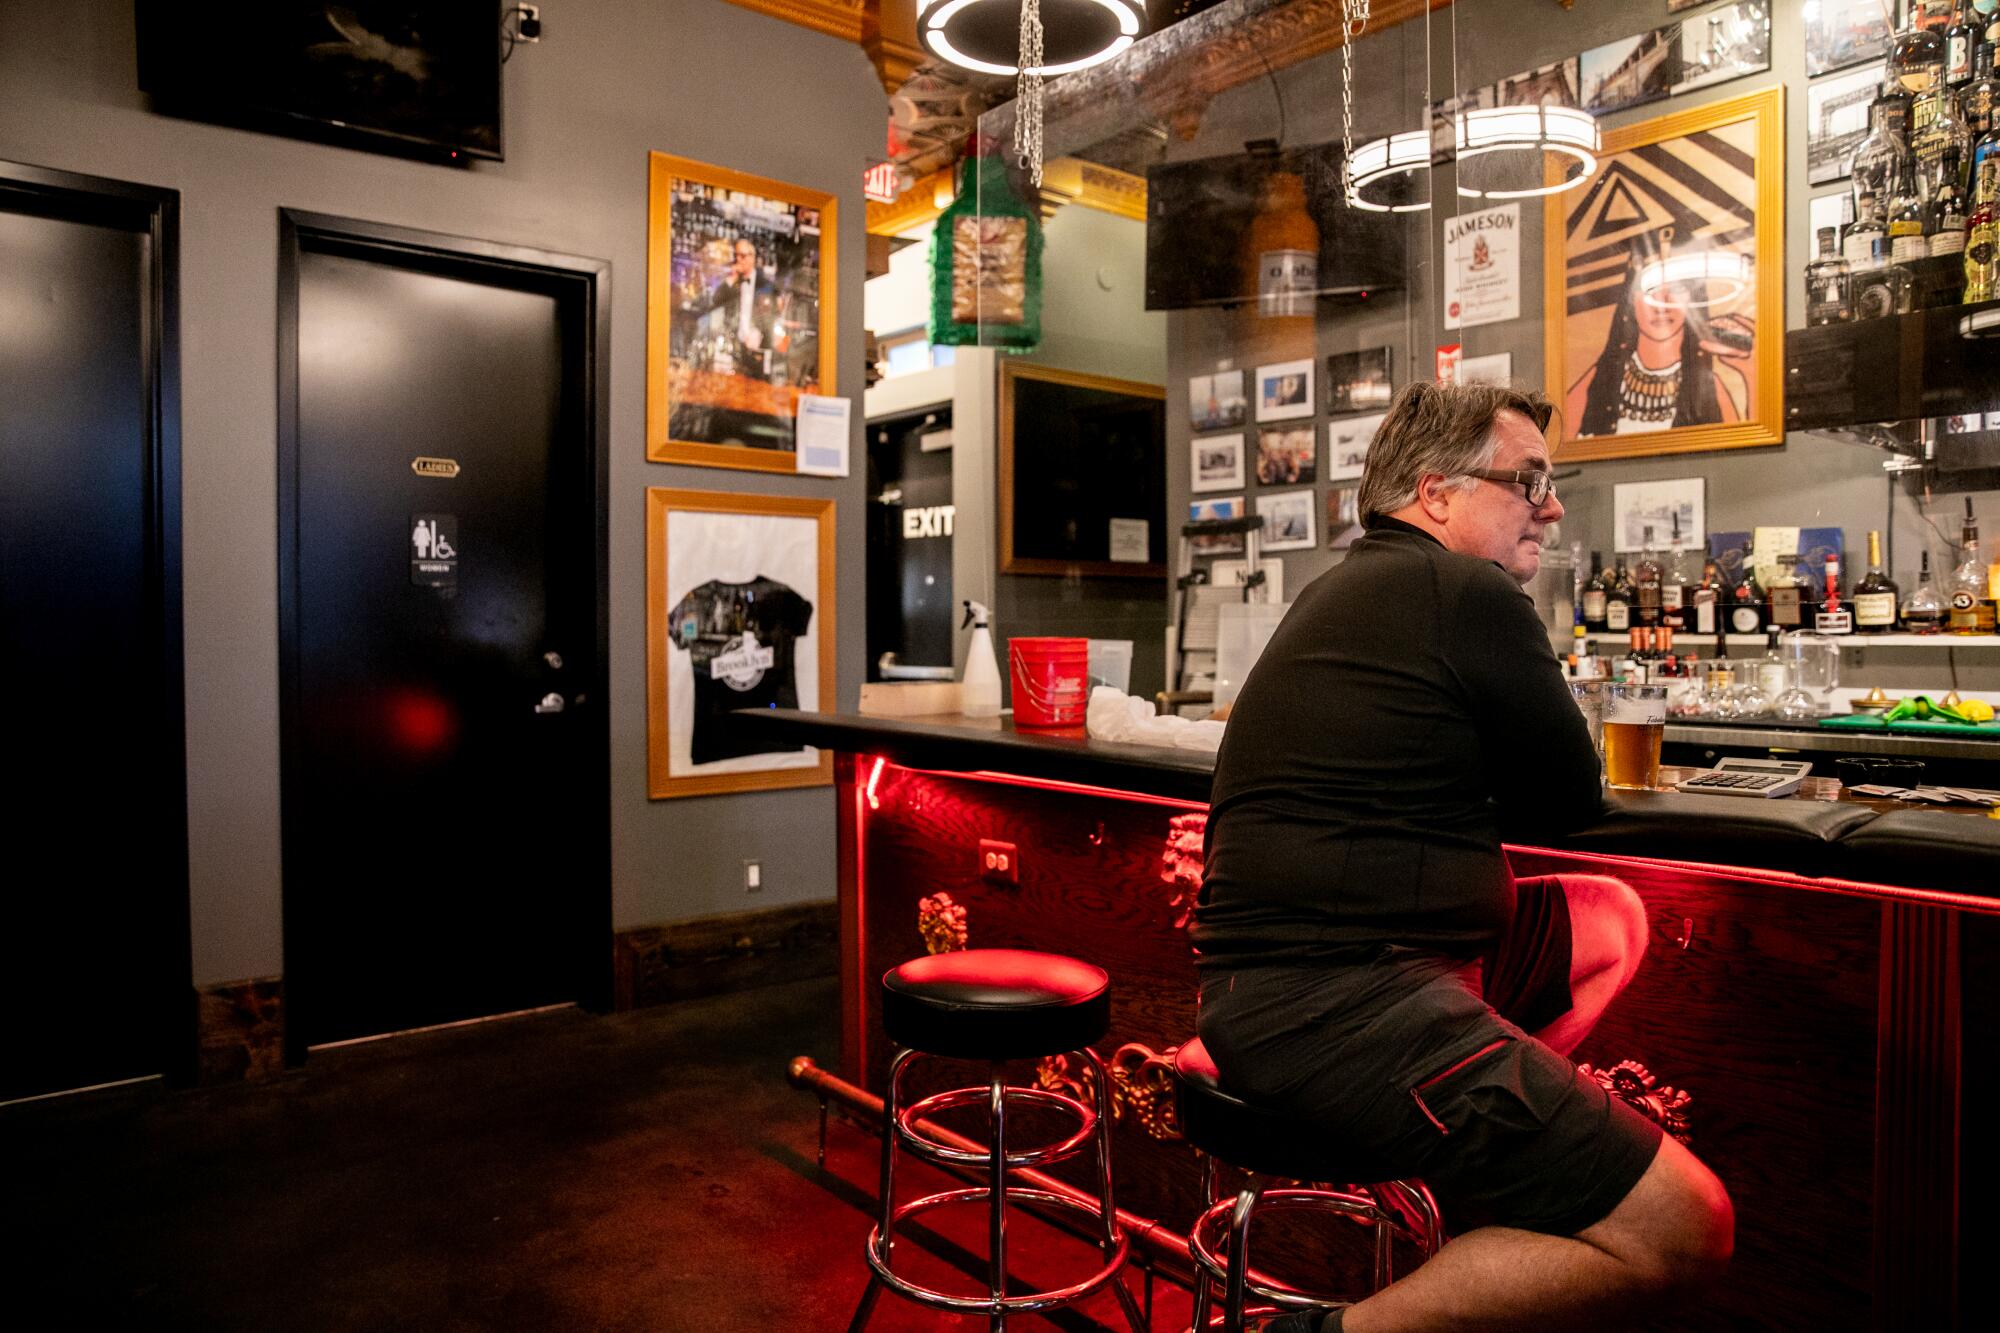 John Lutzius shares memories of his brother Bill Lutzius while posted up a the bar on Monday.